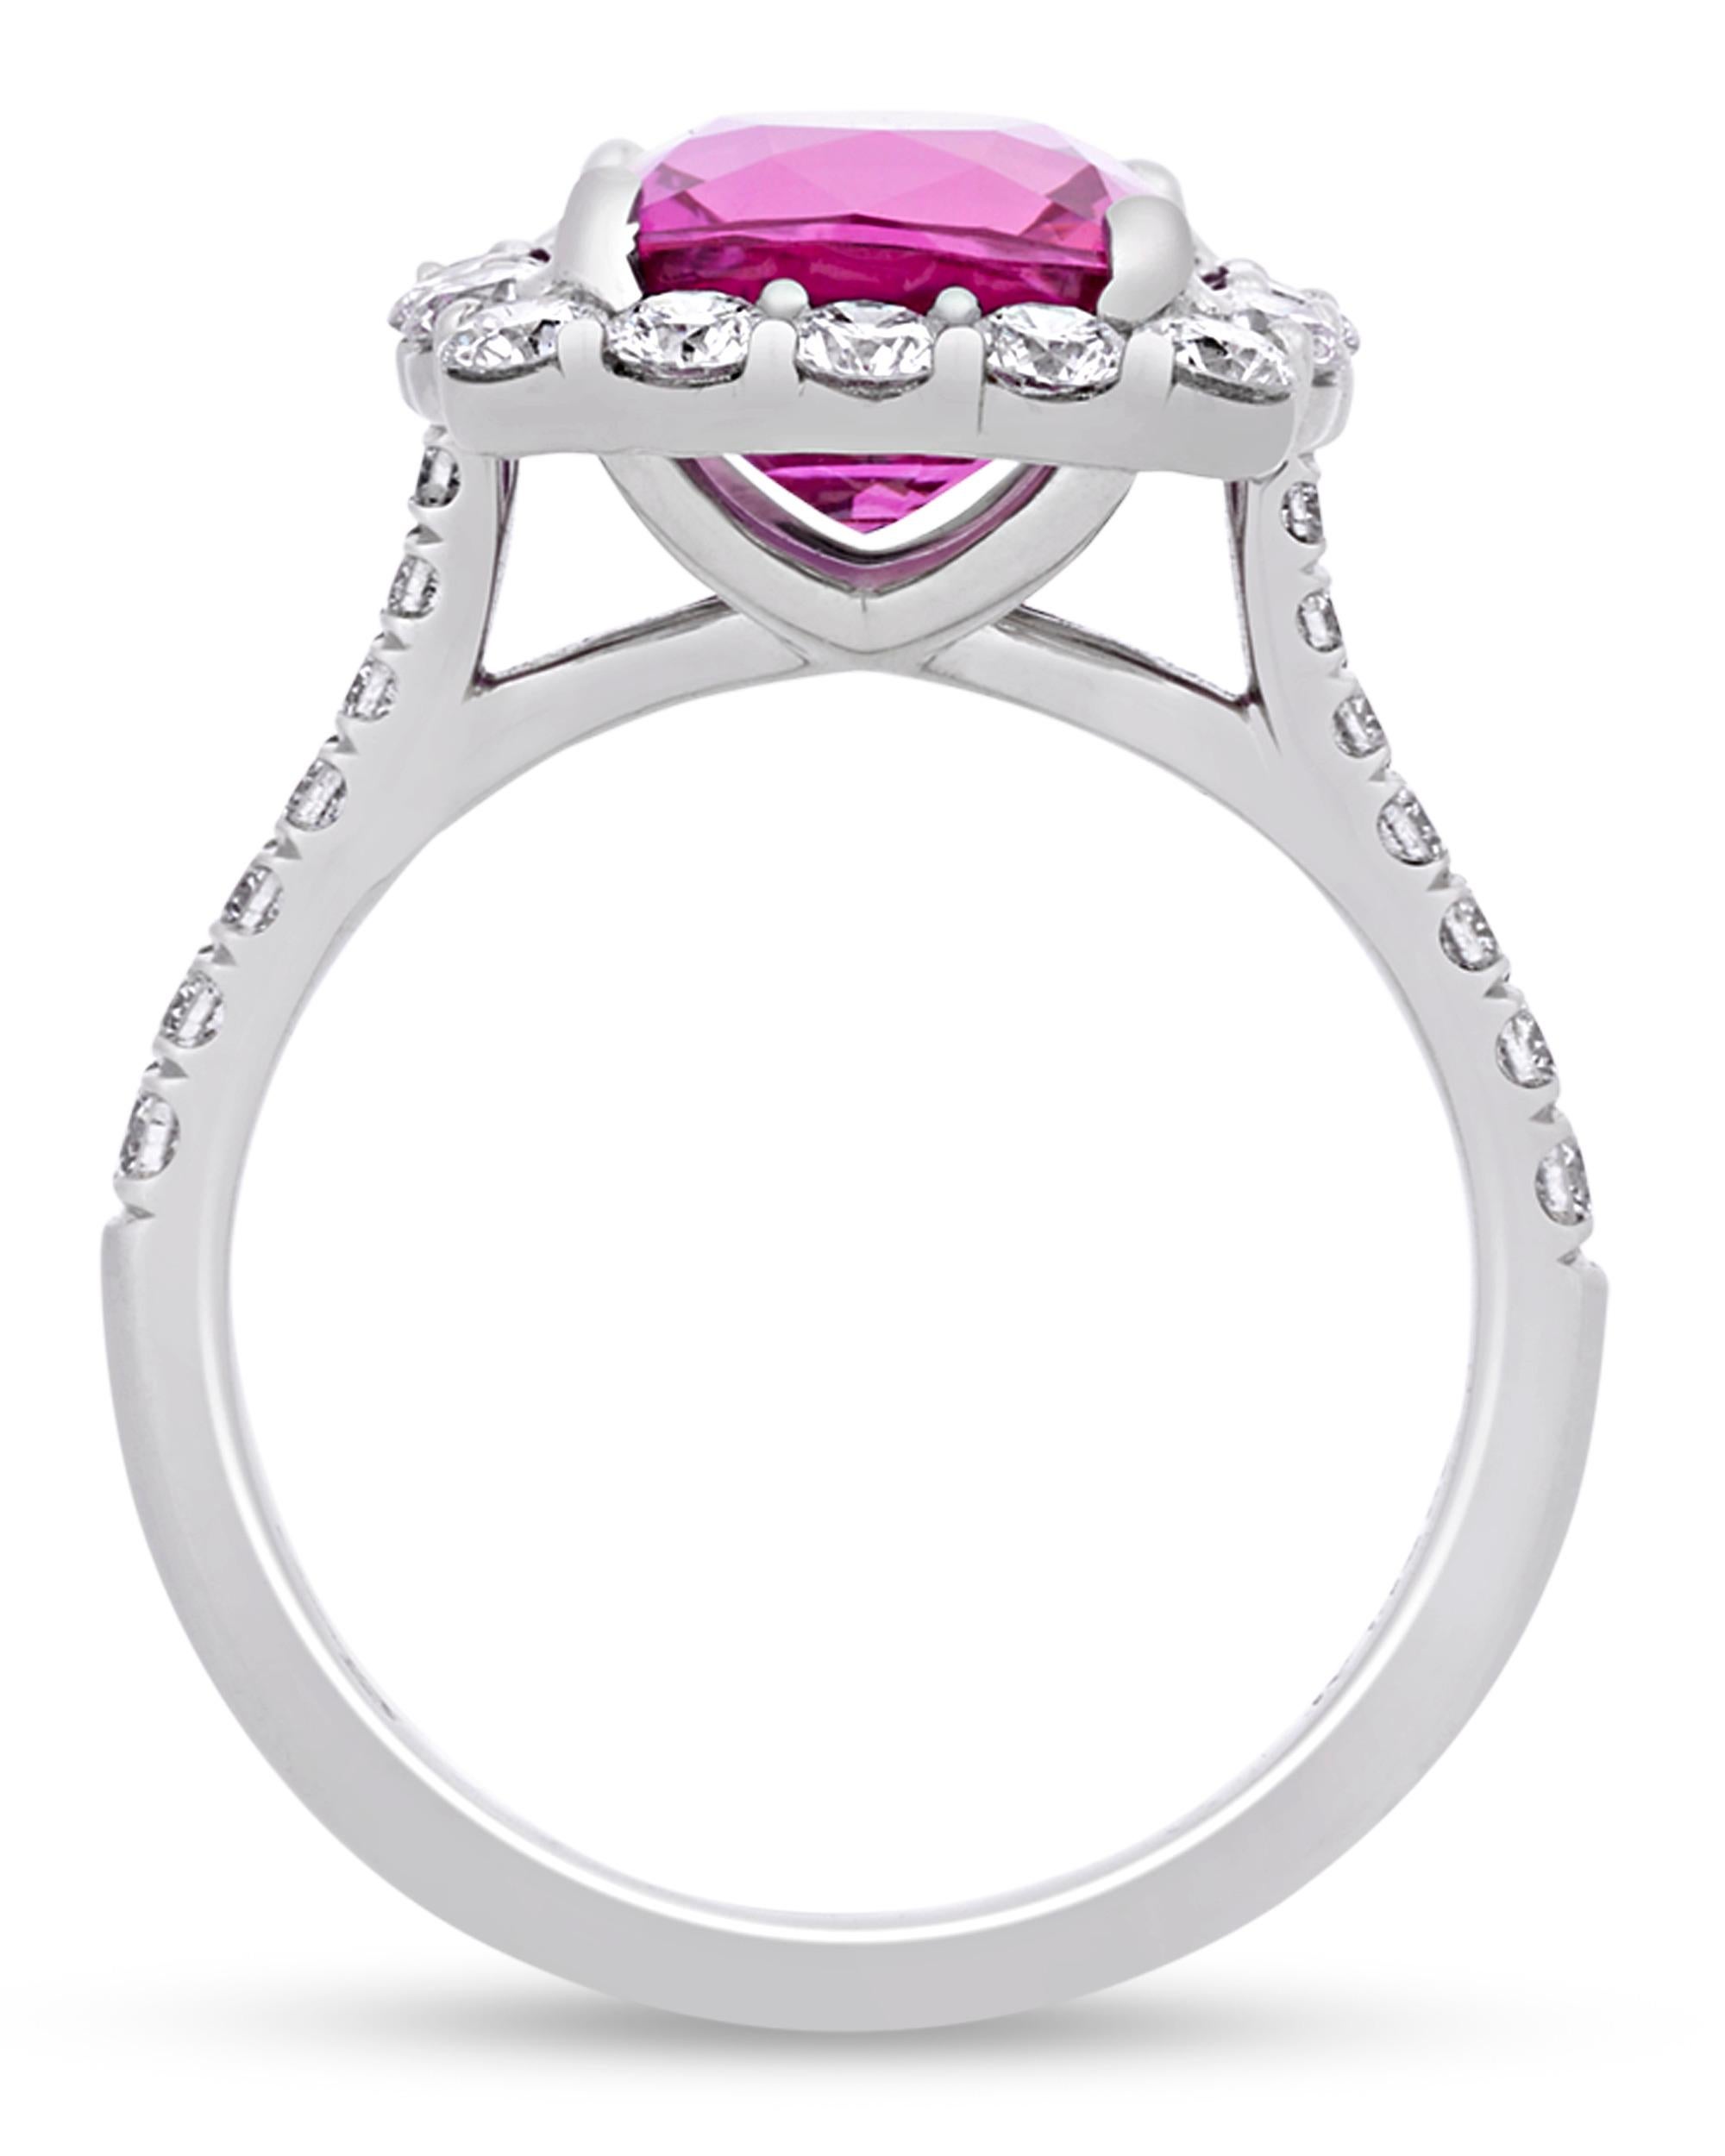 A striking cushion brilliant-cut purplish-pink sapphire, weighing 4.41 carats, sits at the center of this ring. The rosy jewel is encircled by round brilliant diamonds totaling 1.05 carats and set in platinum.